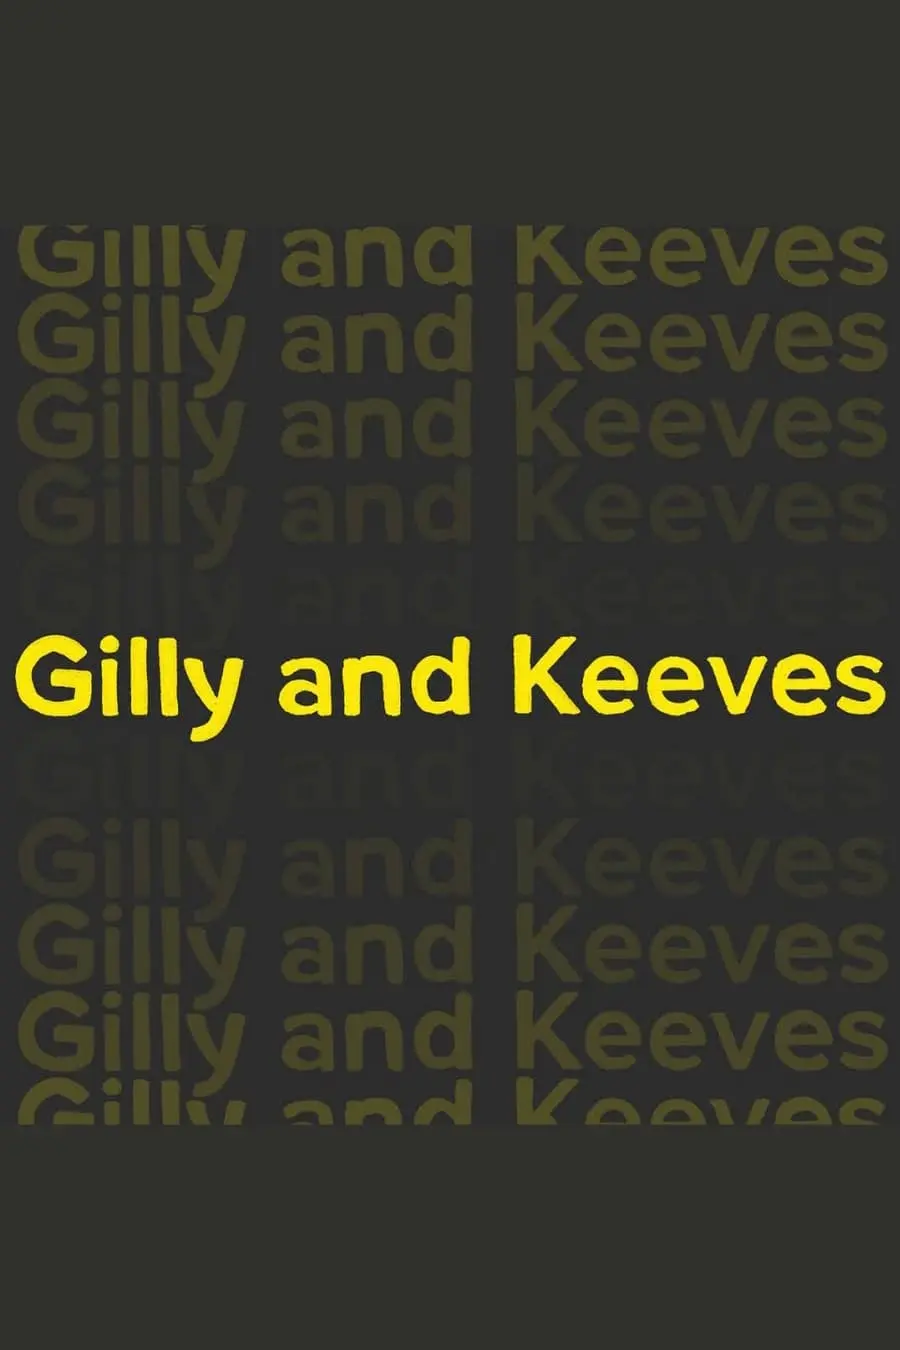 Gilly and Keeves_peliplat